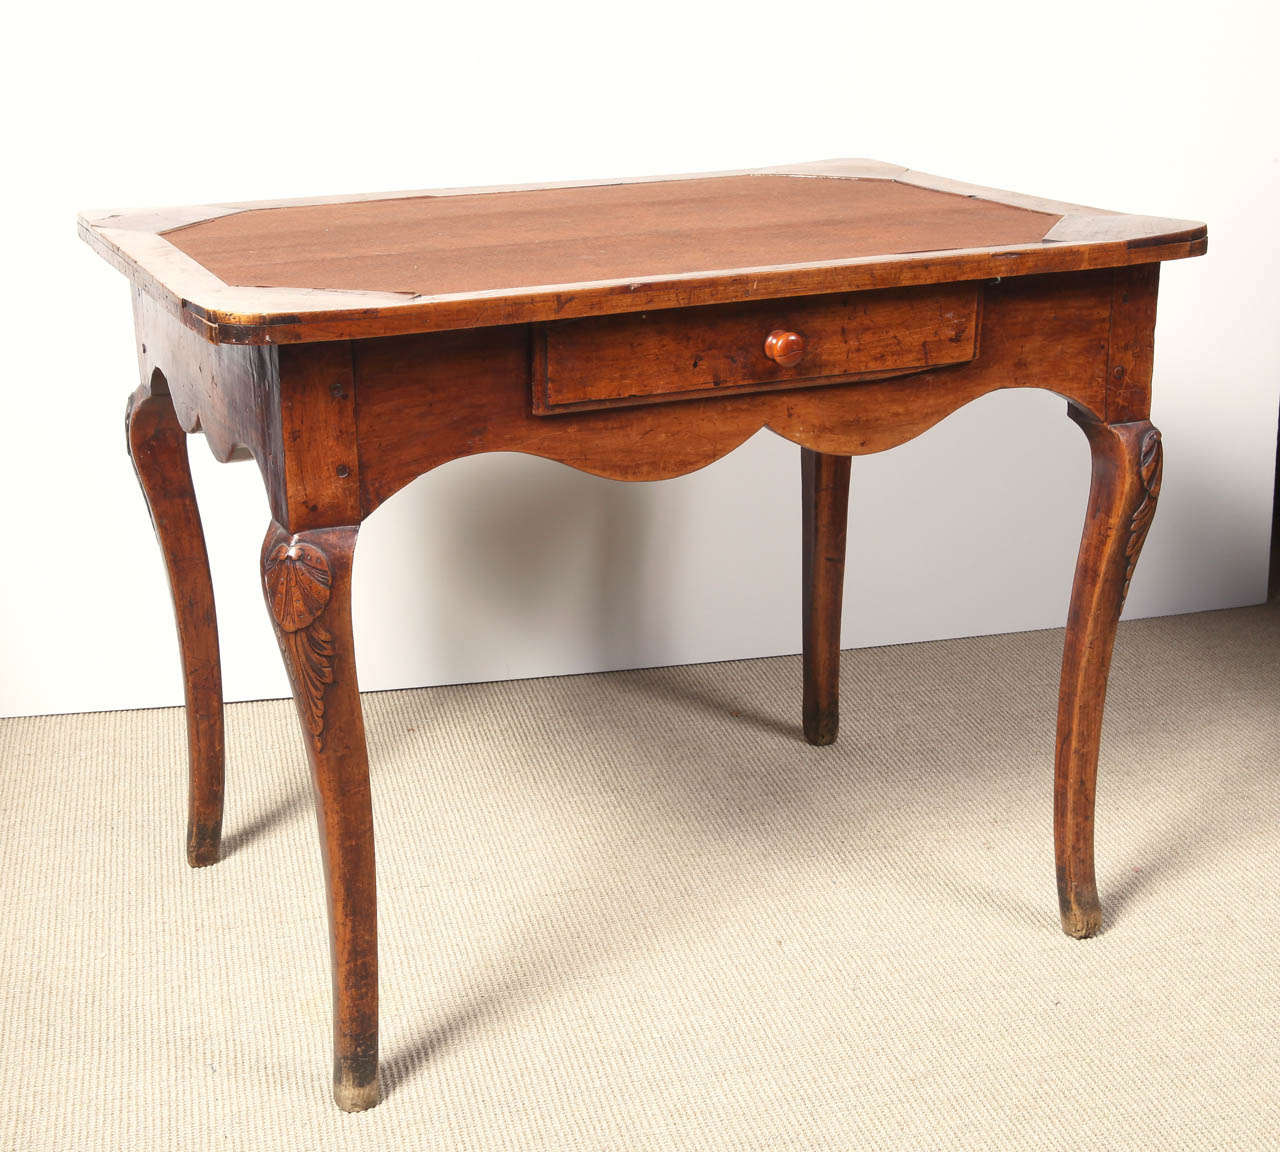 Louis XV period table in cherry, C. 1760 Provincial.  Center drawer, felt top, carving at knees of legs.